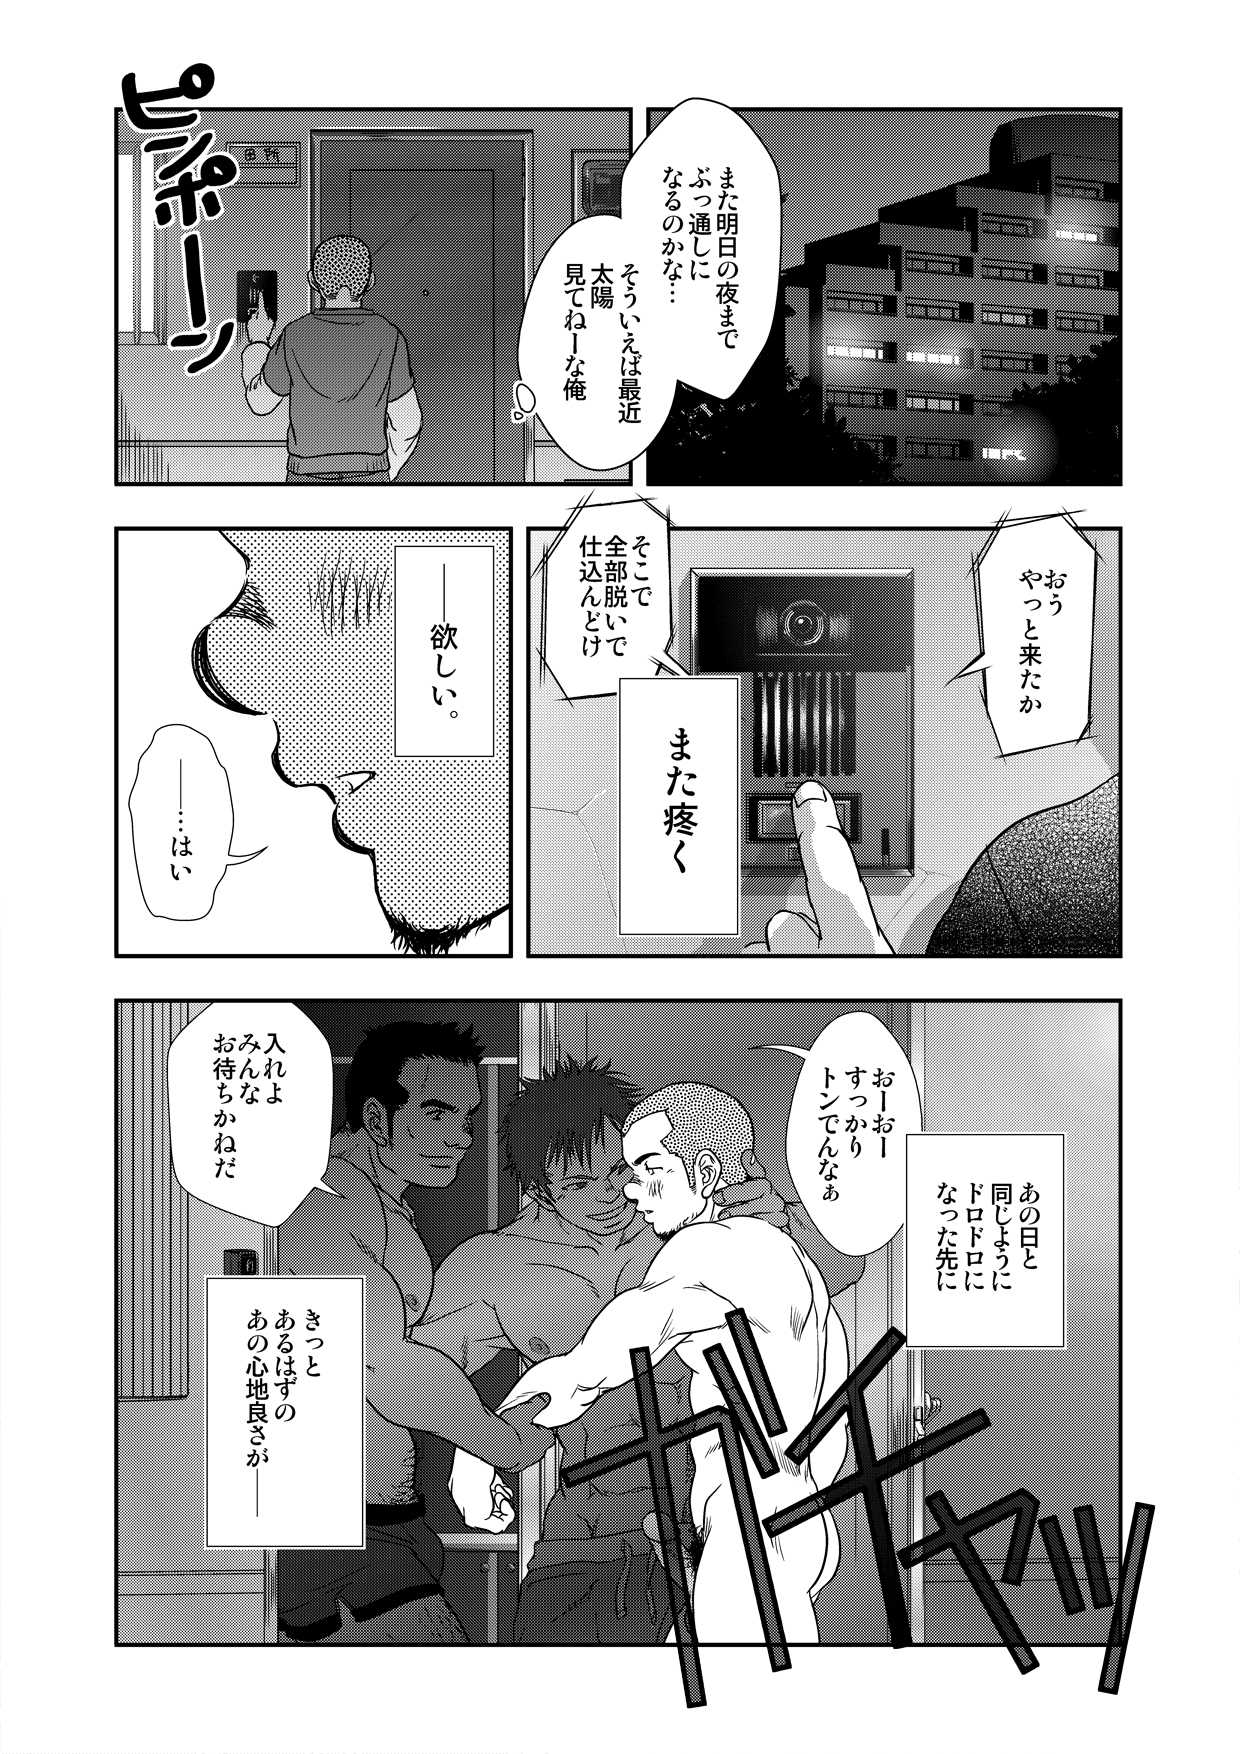 [Kenta] On the Sunny Side of the Street (doujin + GC) 